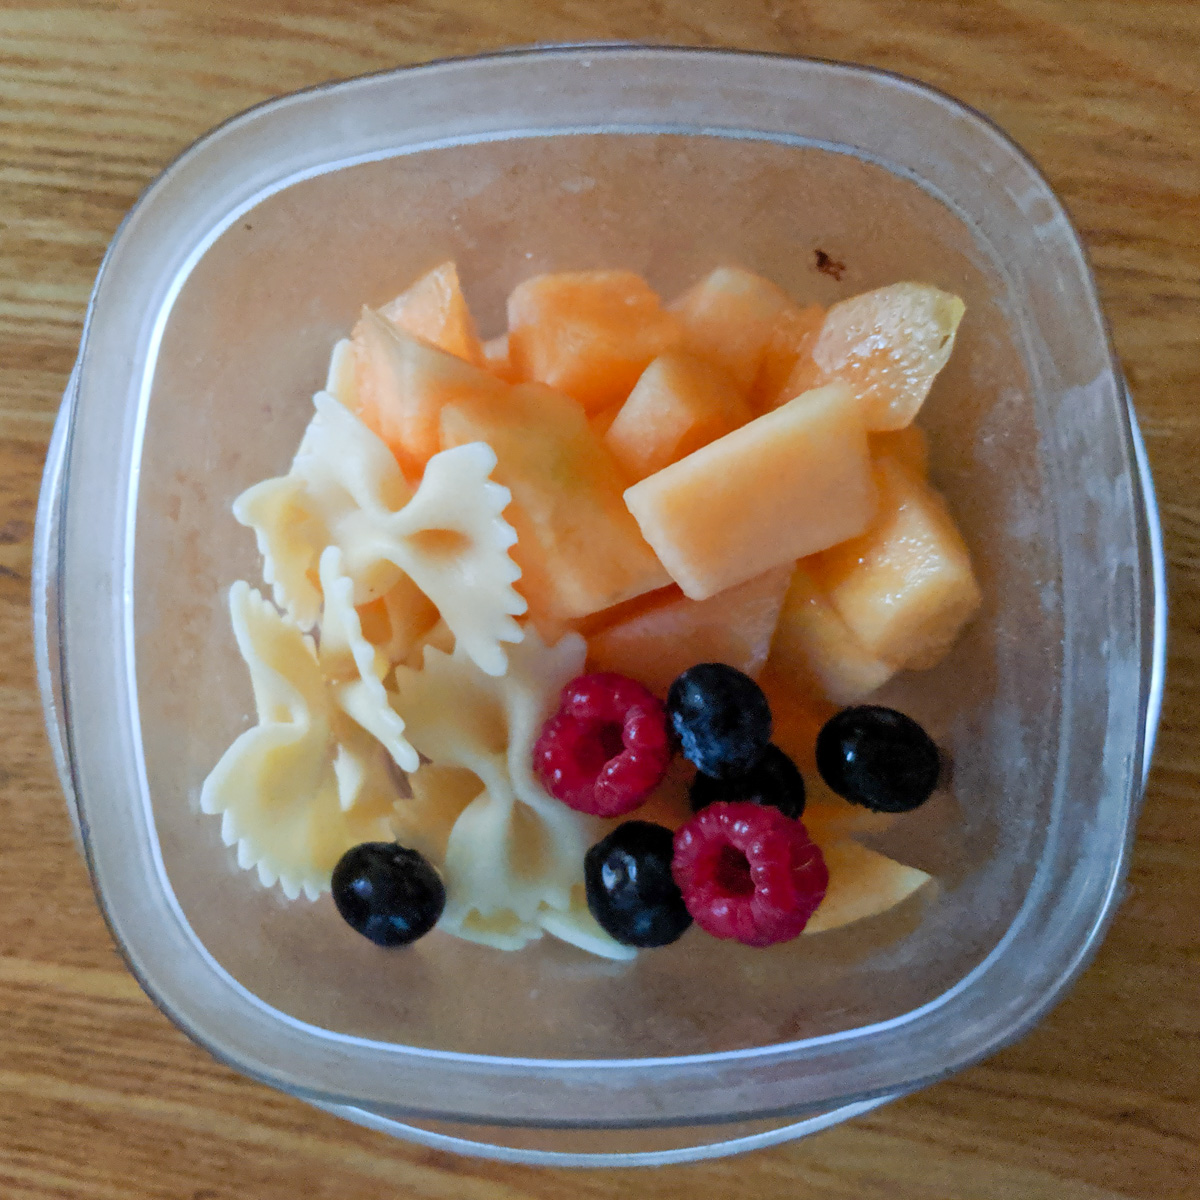 A snack cup with bowtie pasta, cantaloupe, and berries.